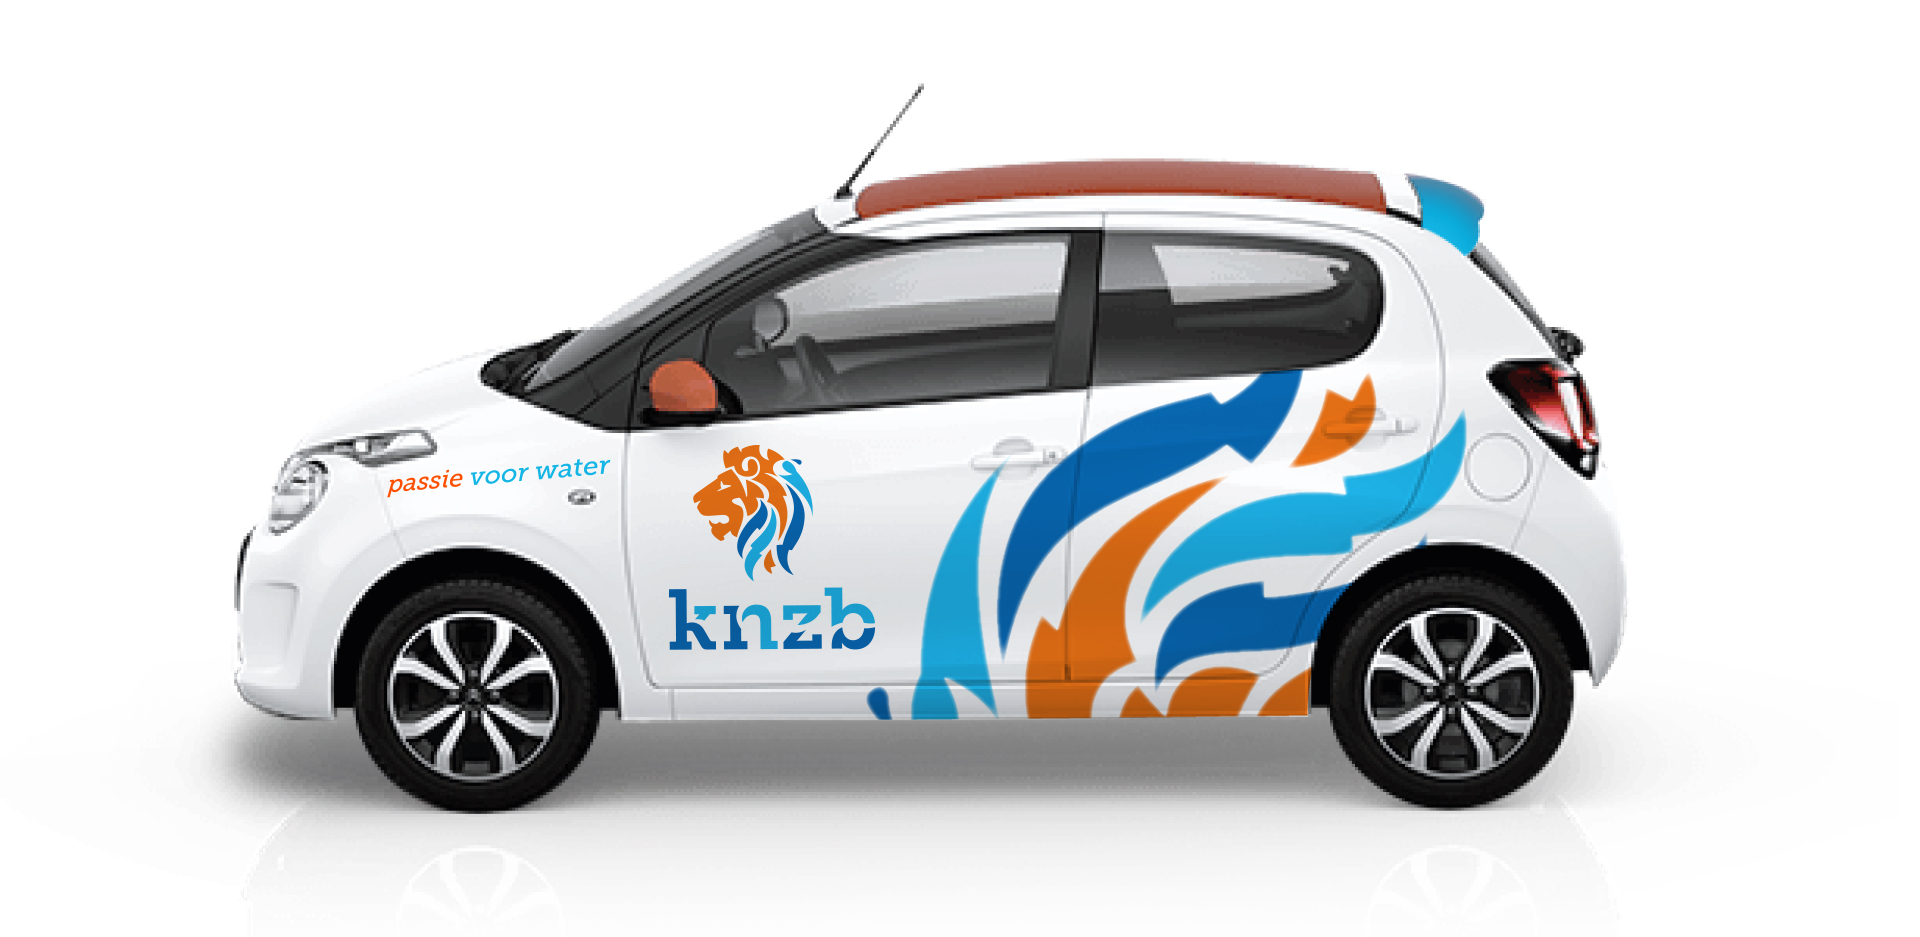 Knzb Auto belettering